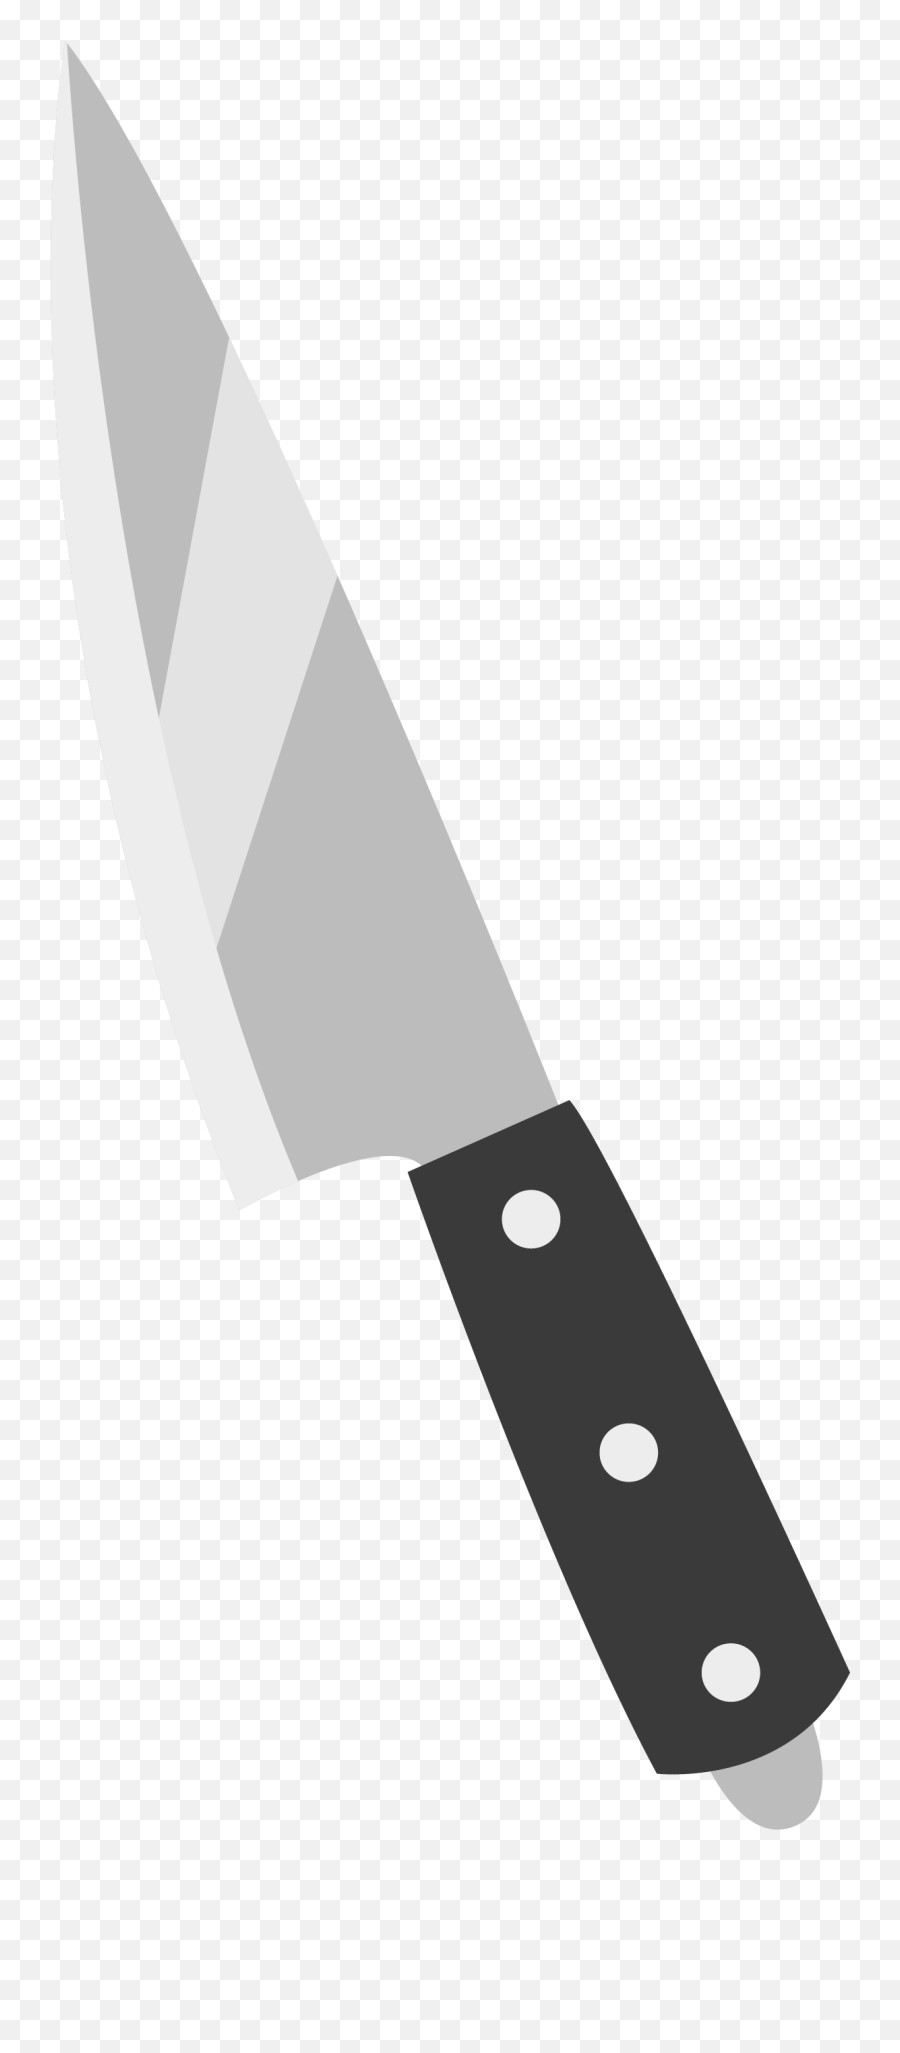 Kitchen Knife Throwing - Vector Si 2112023 Png Horizontal,Knife Transparent Background